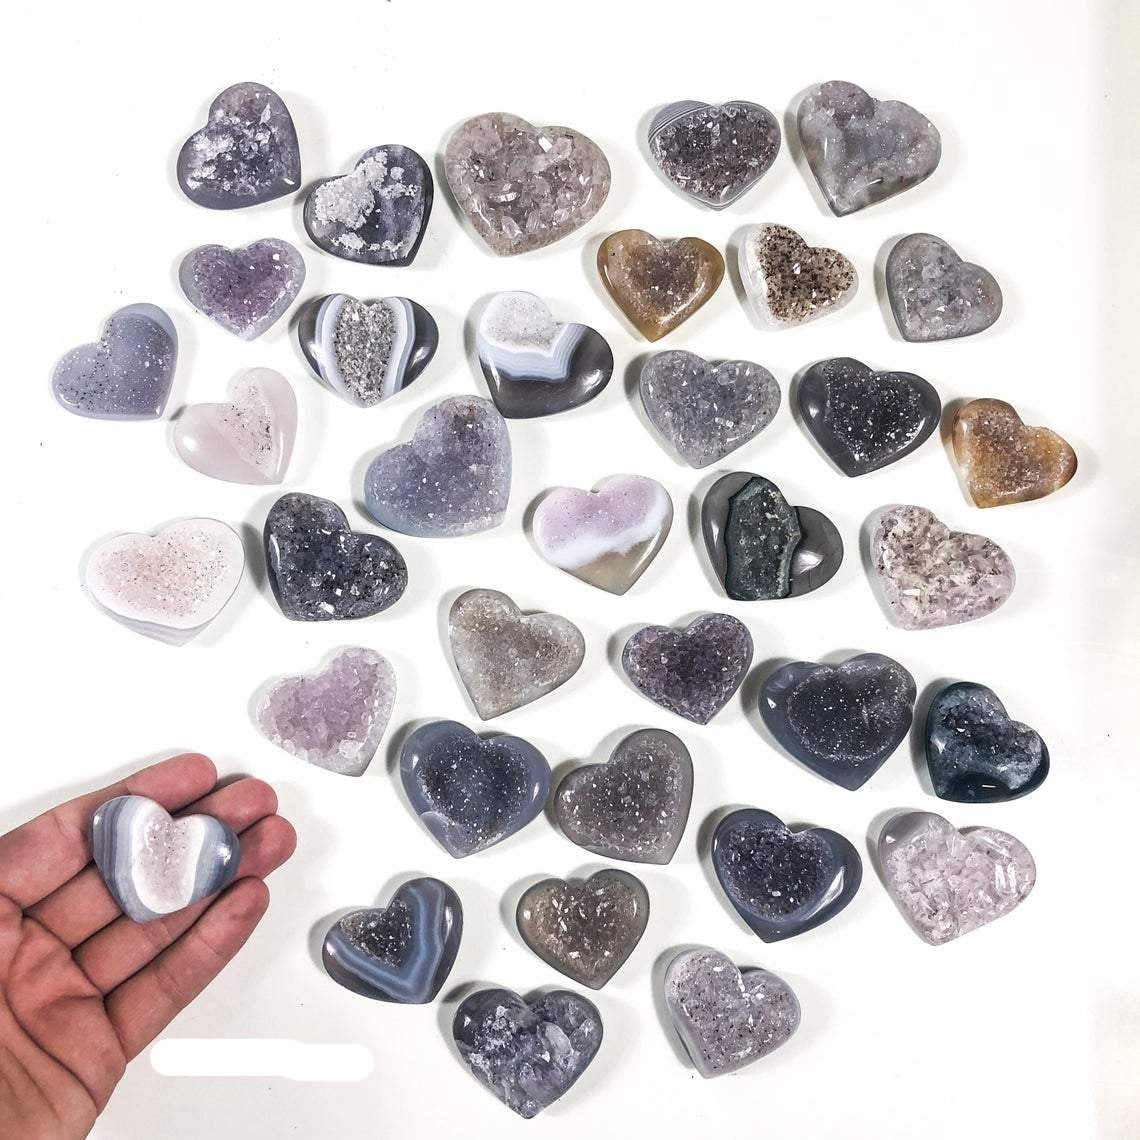 Agate Druzy Heart in a hand and multiple agate hearts shown on a white background to display color, pattern and size variation.